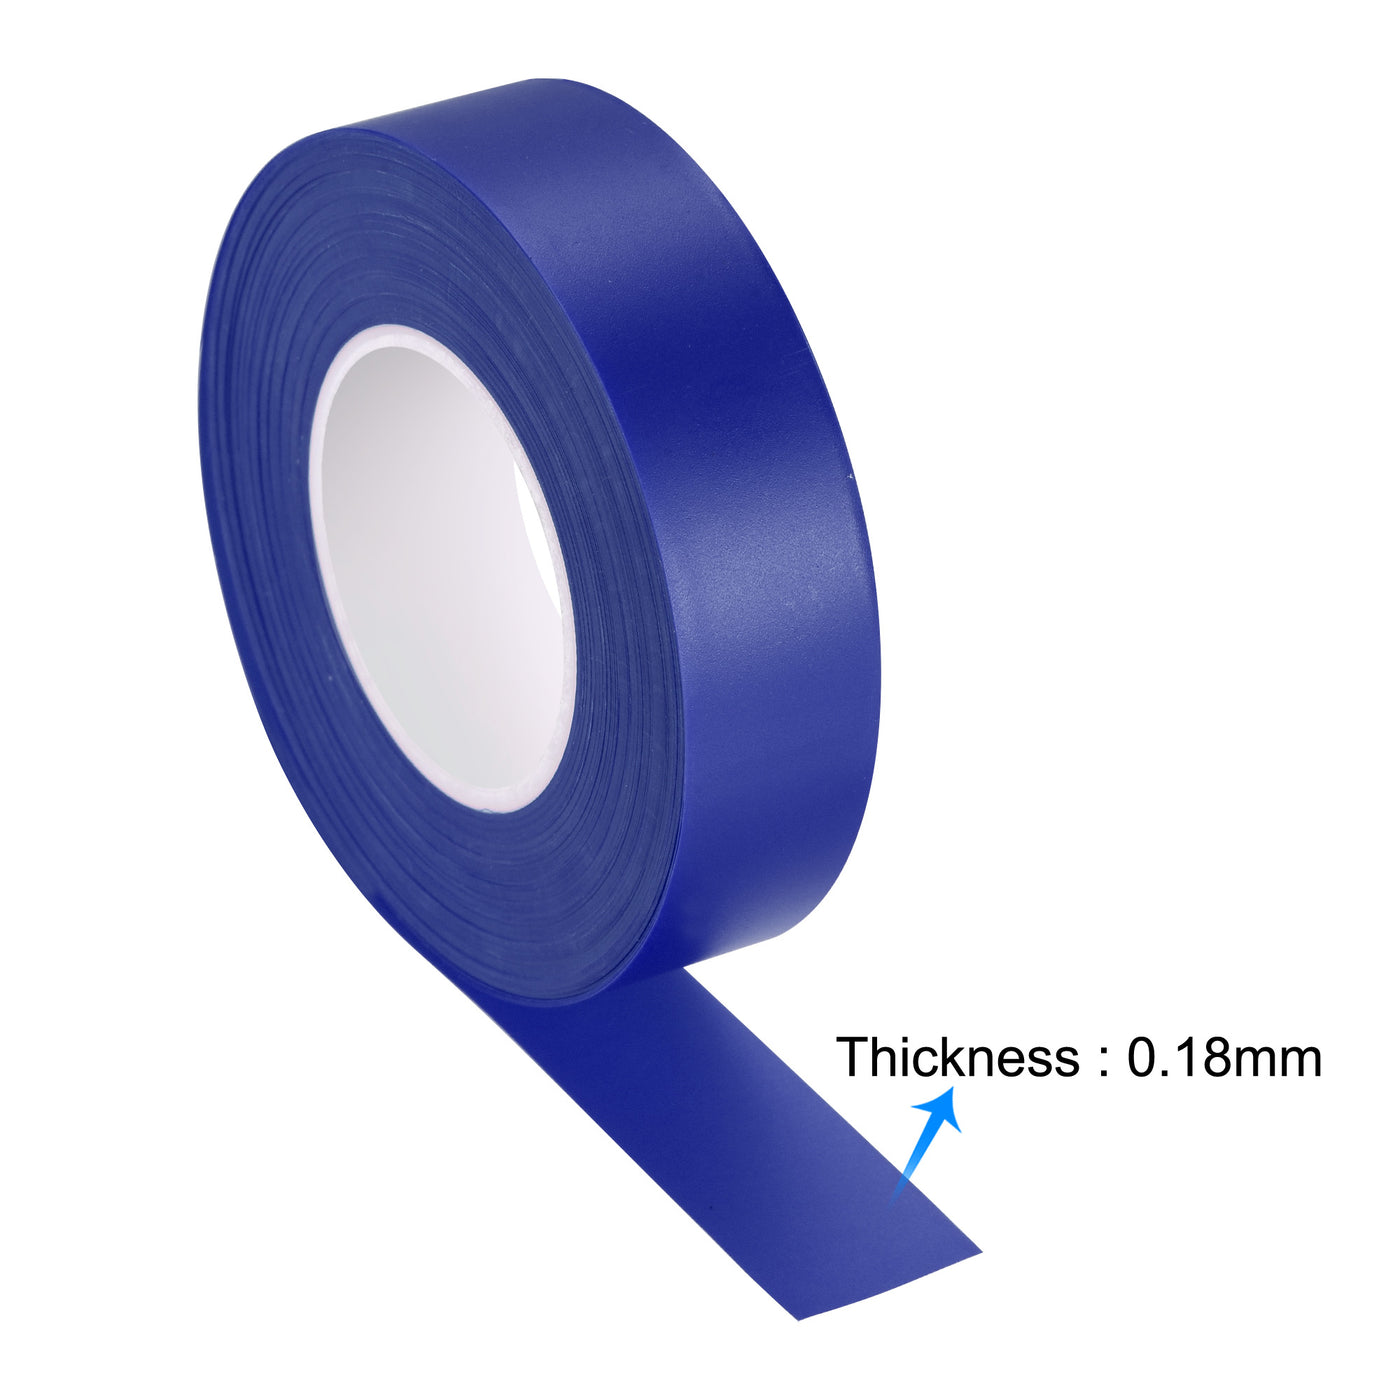 uxcell Uxcell PVC Flagging Tape 20mm x 20m/65.6ft Marking Tape Non-Adhesive Blue 3pcs